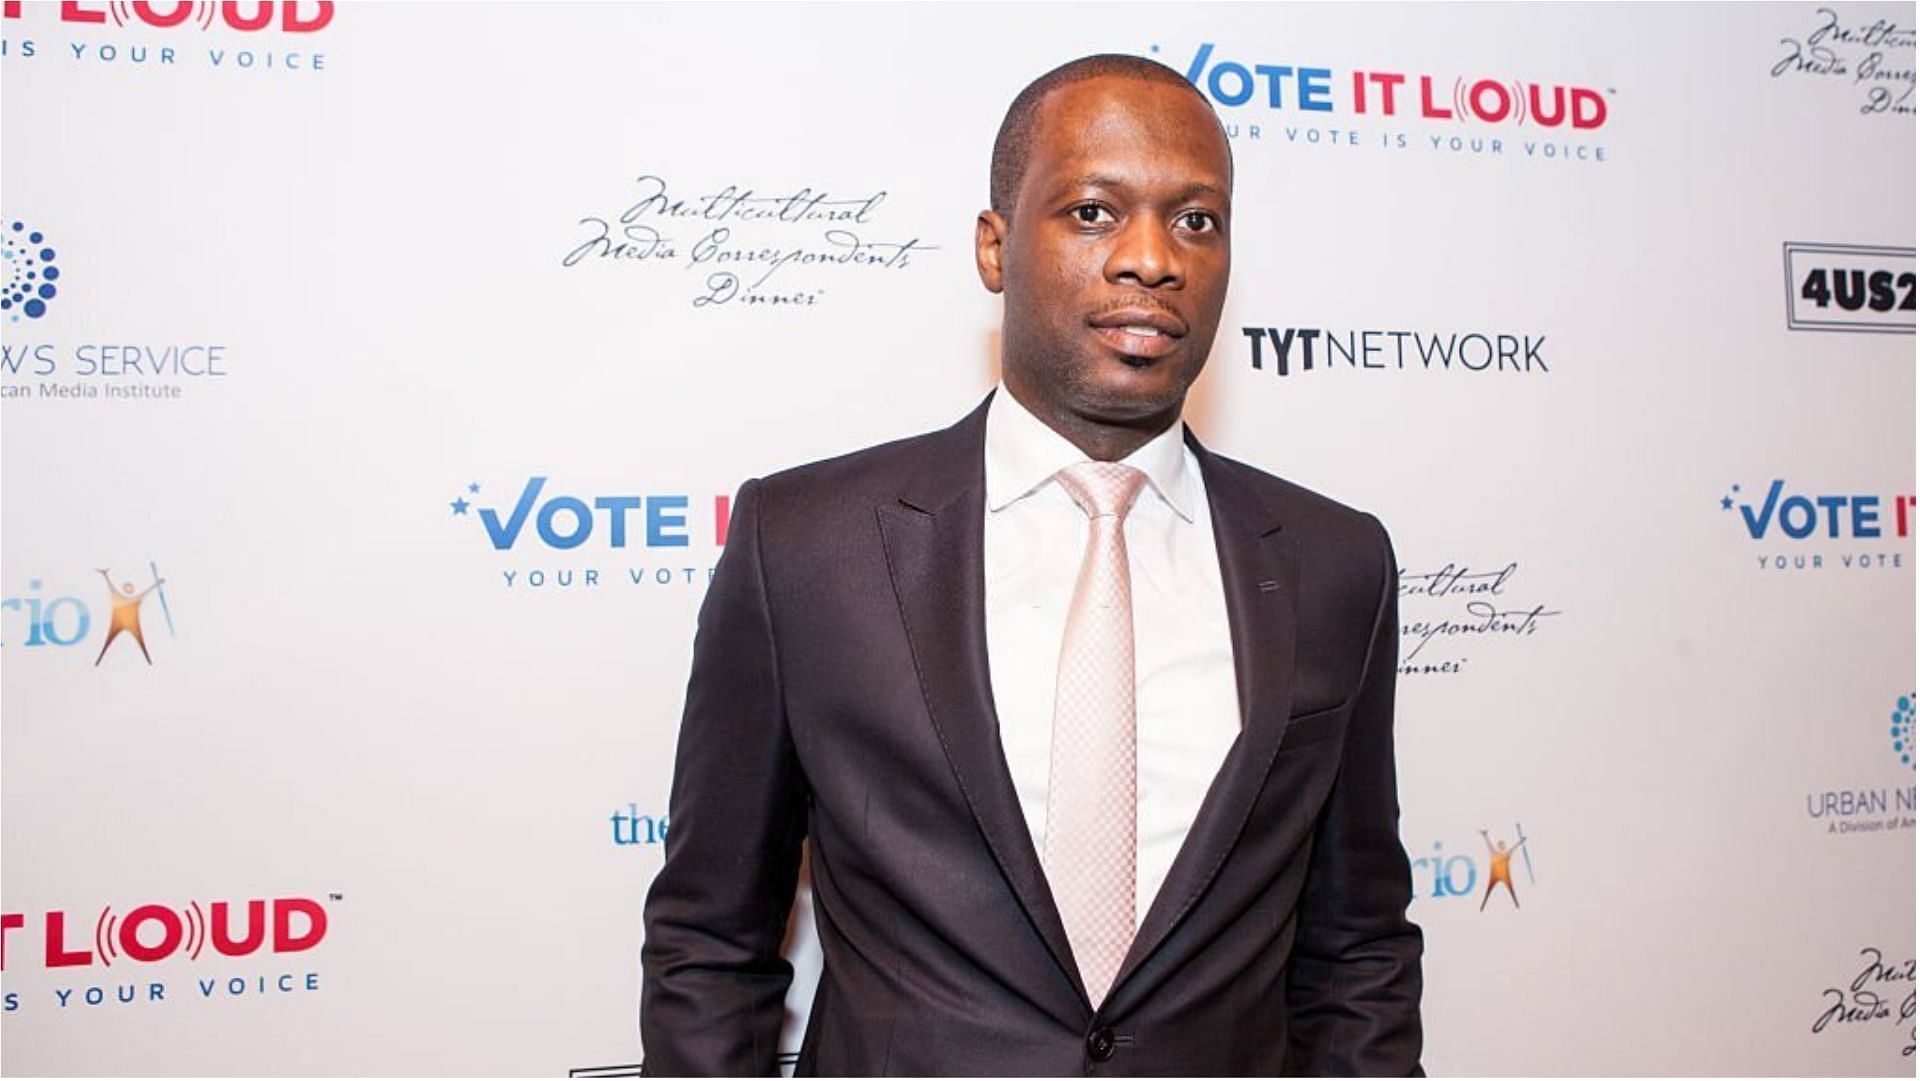 Pras Michel is a well-known rapper, producer, songwriter and actor (Image via Cheriss May/Getty Images)